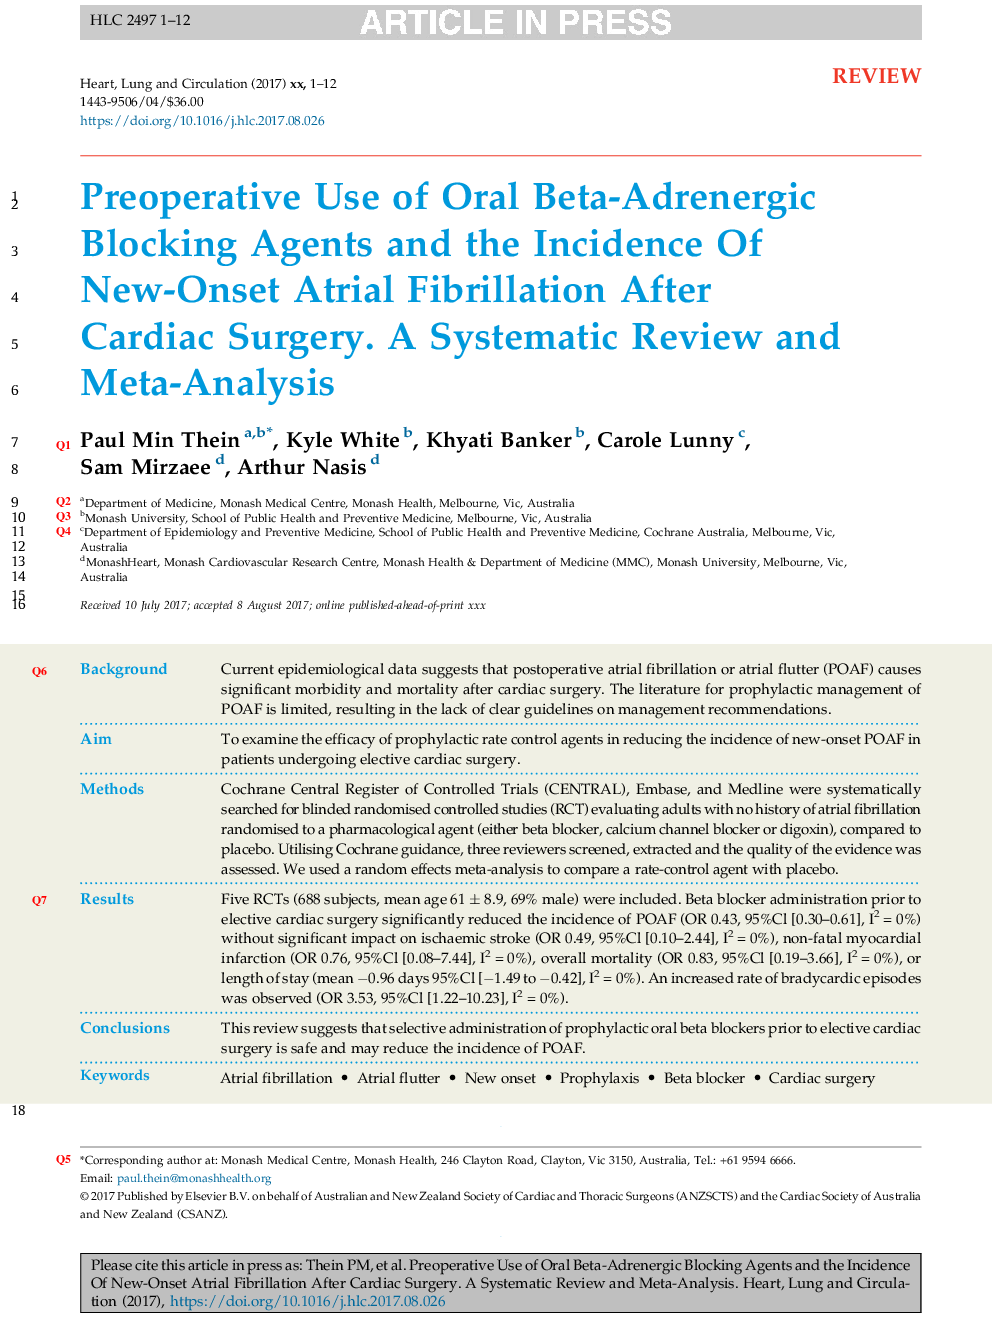 Preoperative Use of Oral Beta-Adrenergic Blocking Agents and the Incidence of New-Onset Atrial Fibrillation After Cardiac Surgery. A Systematic Review and Meta-Analysis